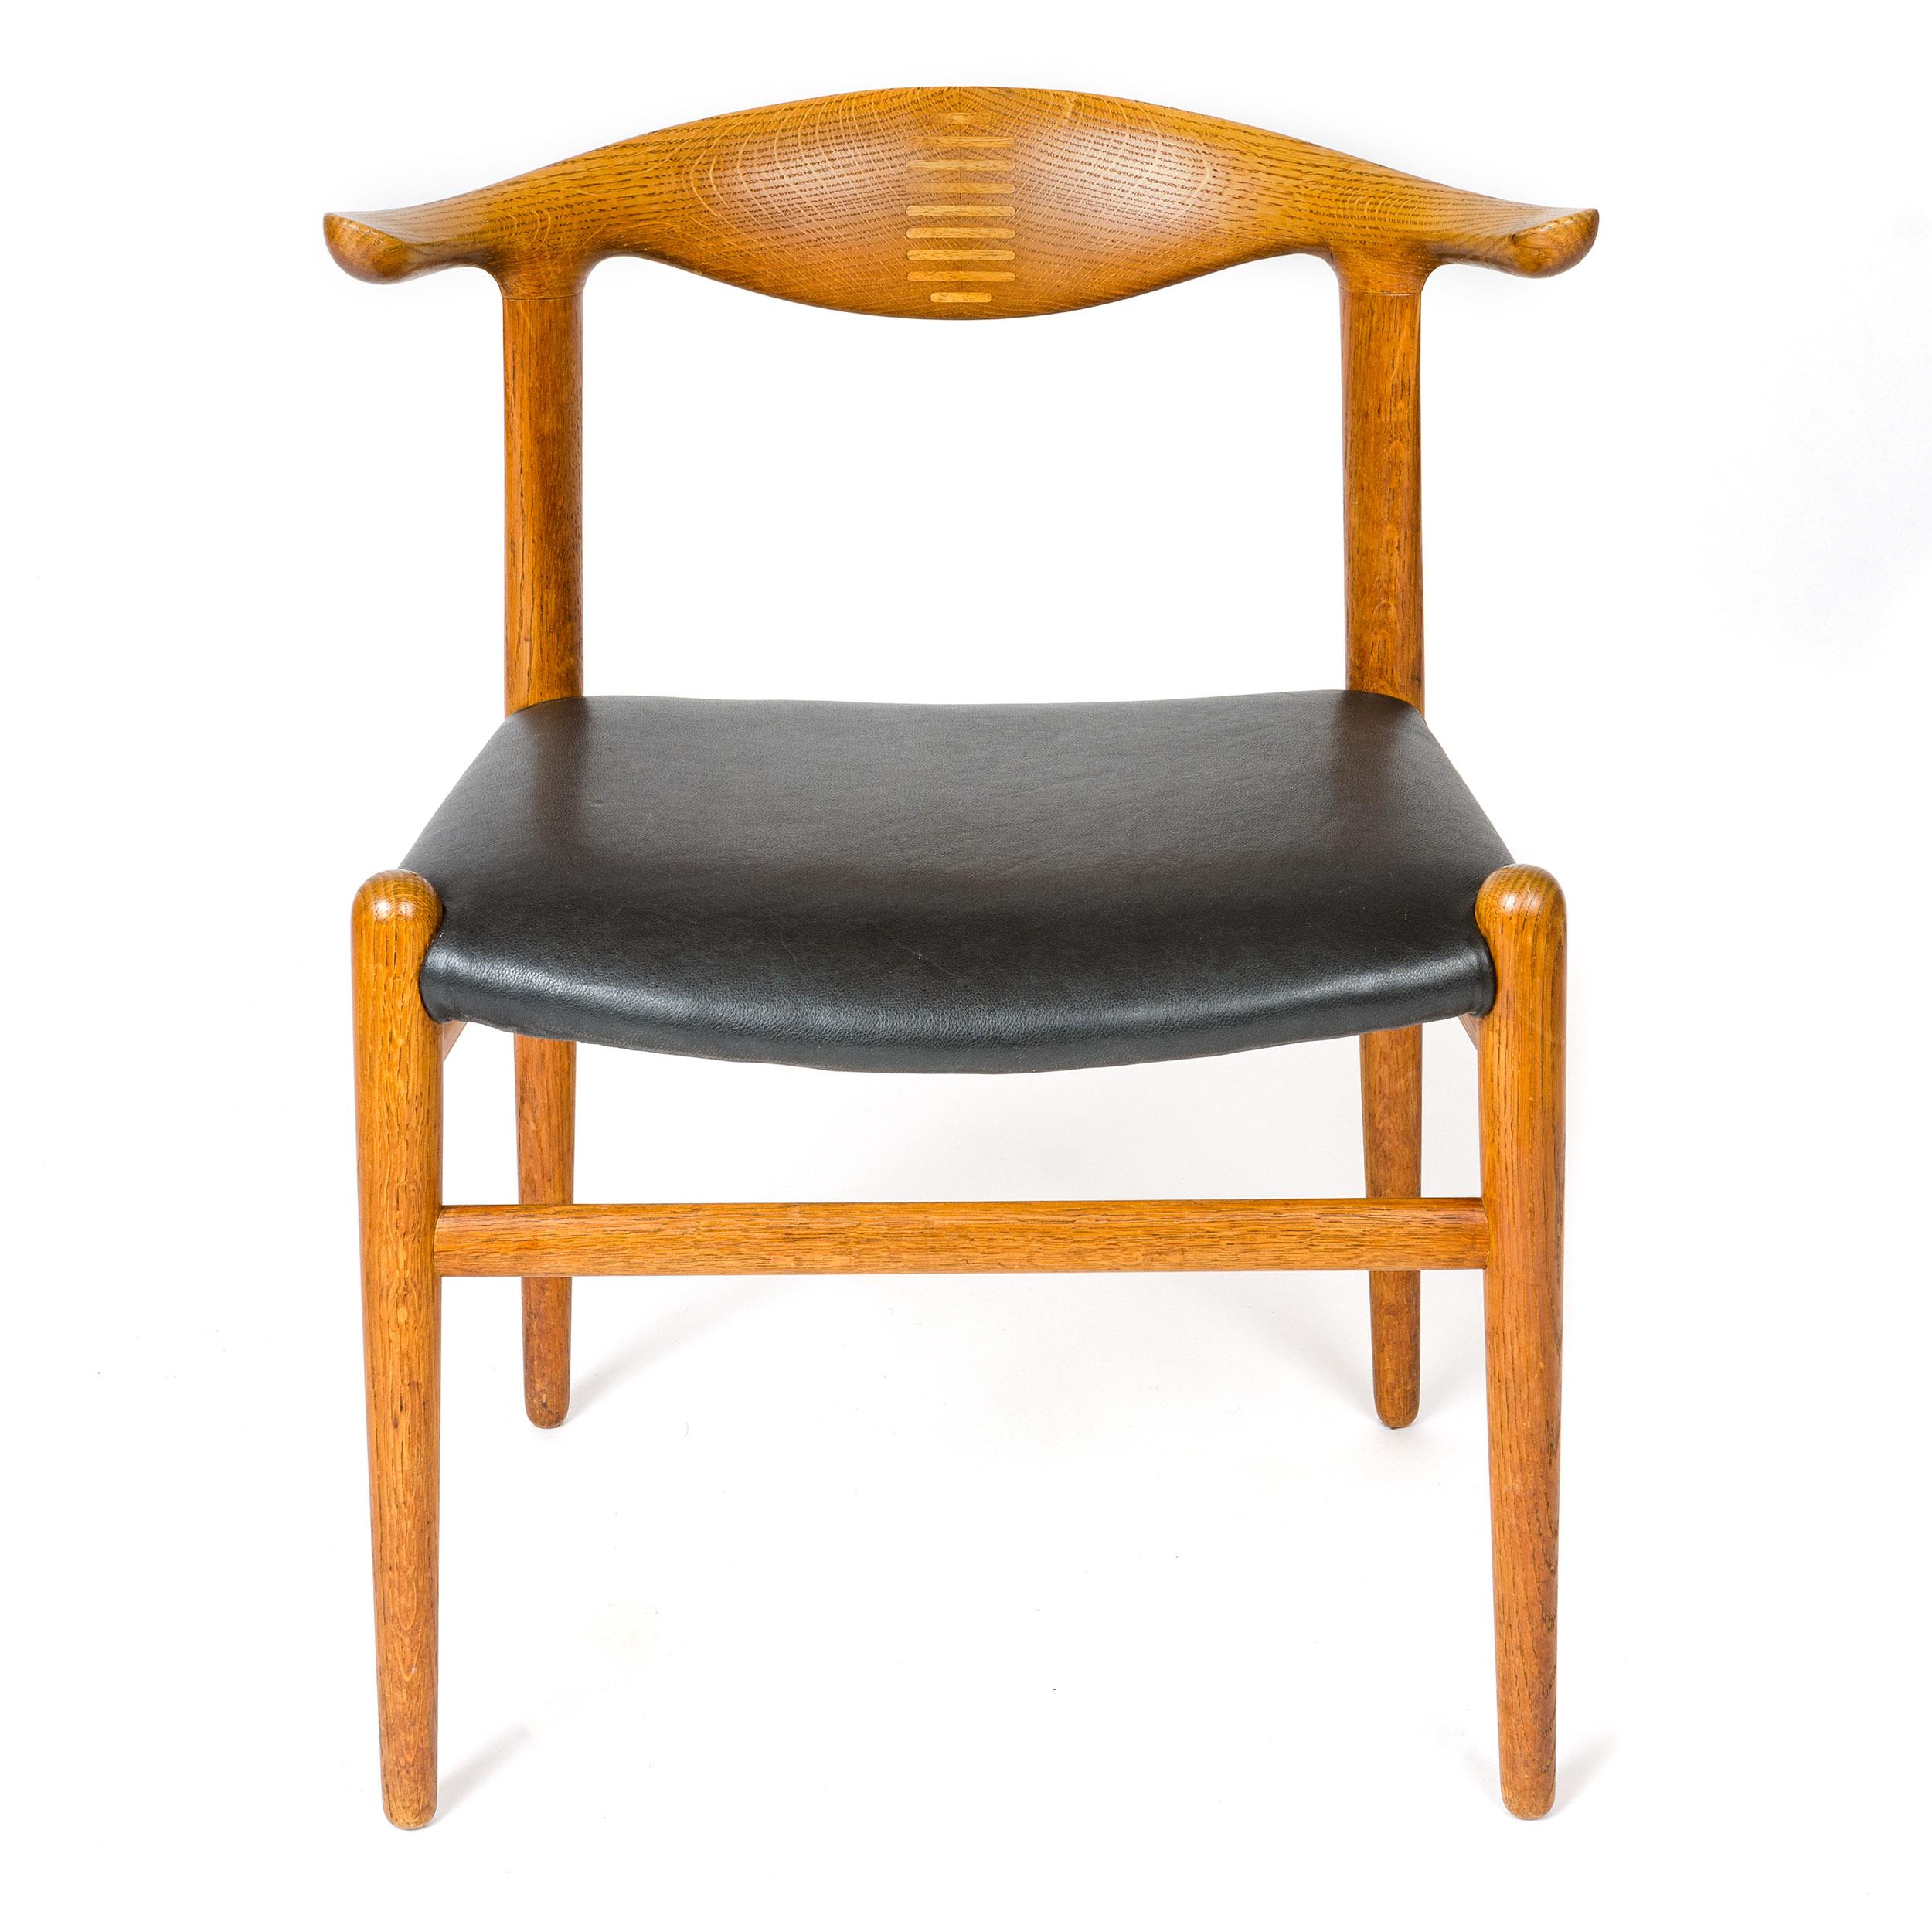 An uncommon oak 'cow horn' dining chair with a splined backrest and an upholstered leather seat. Model JH-505.